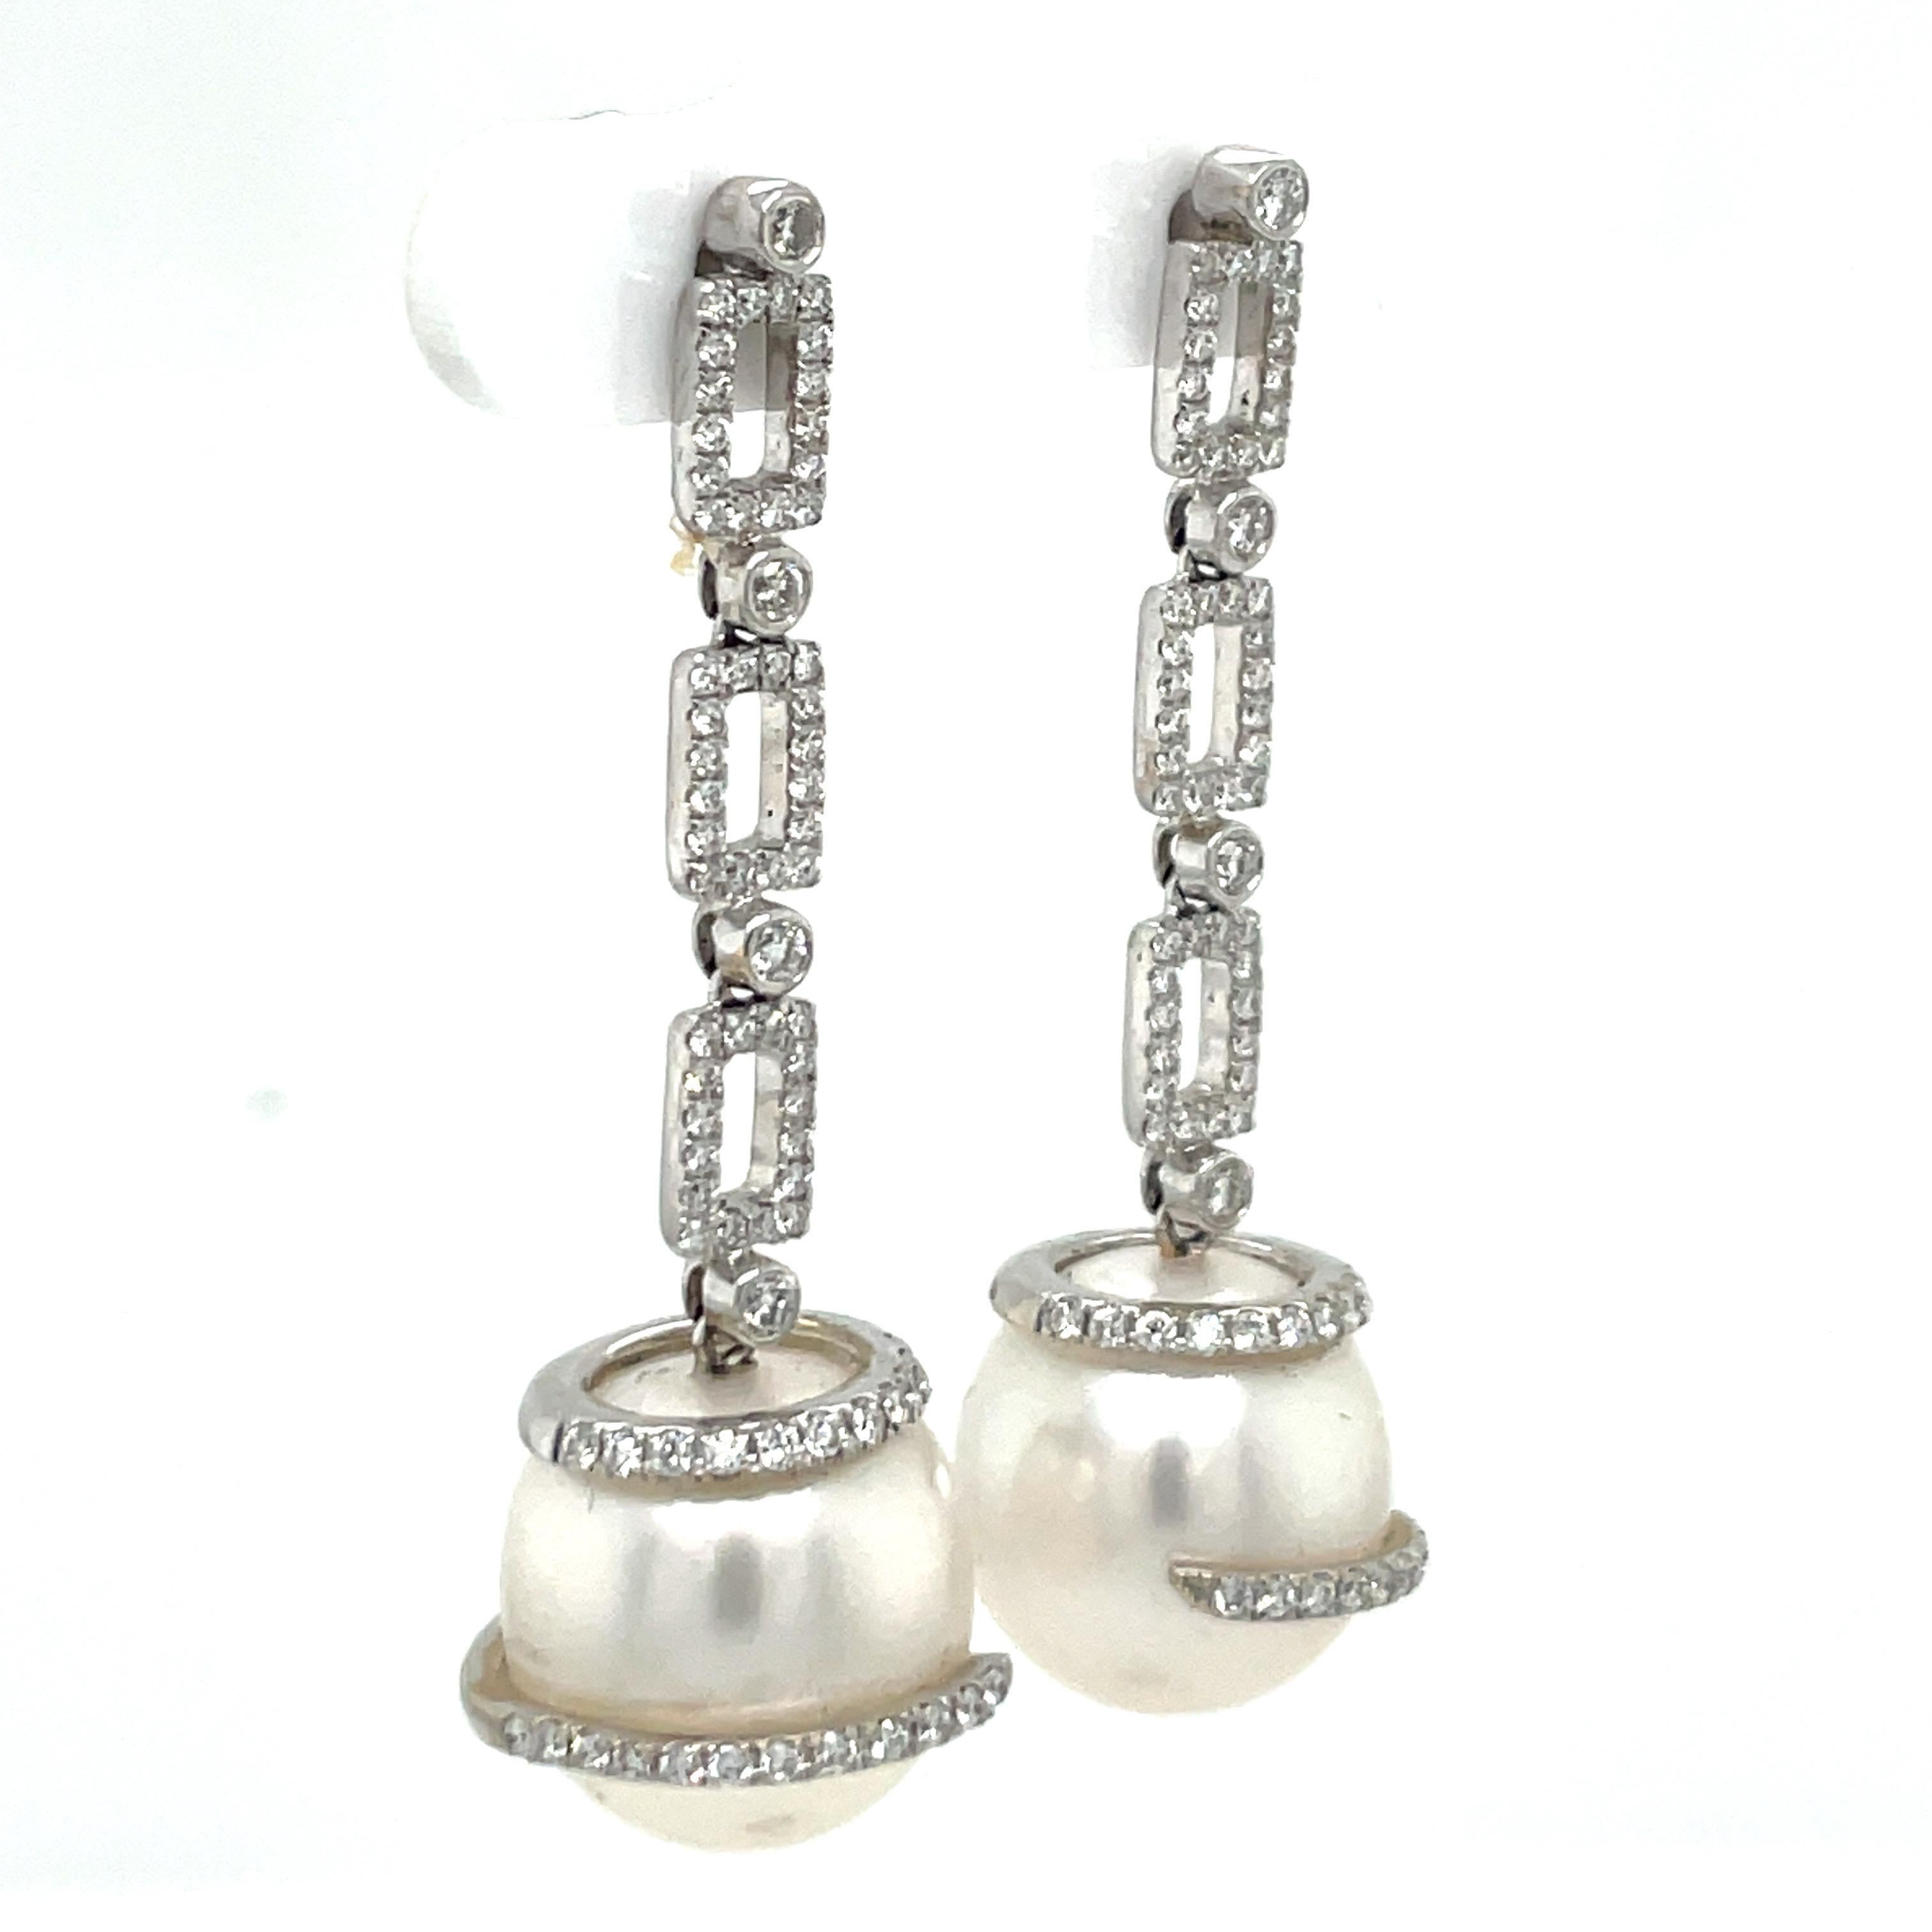 18 Karat White Gold drop earrings featuring 104 round brilliants weighing 1.14 carats and two South Sea Pearls measuring 12-13 MM.
Can customize pearl to Golden, Pink or Tahitian. 
DM for more pricing. 